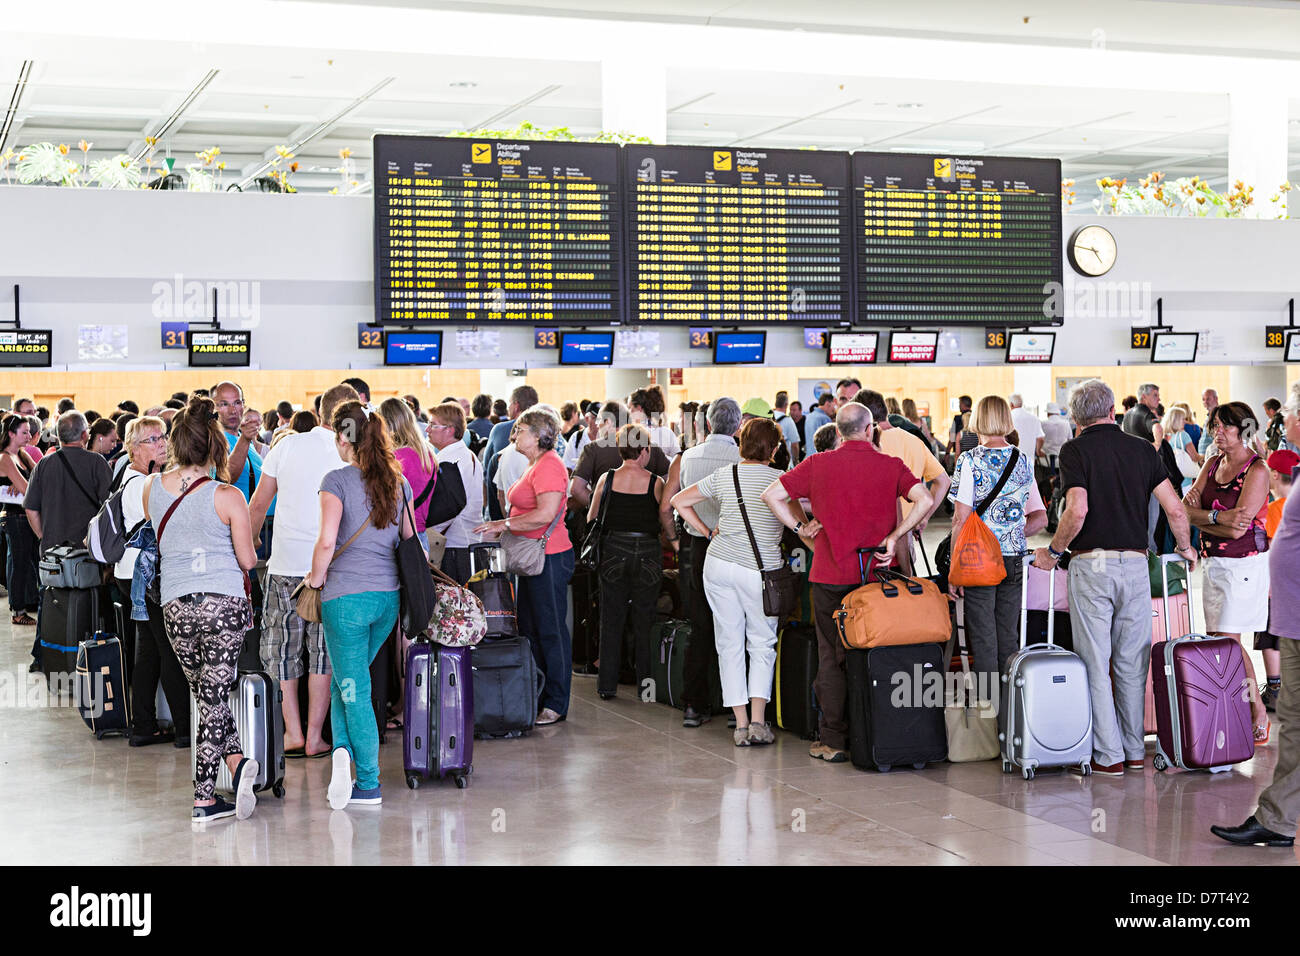 People waiting in line to check in at airport, Lanzarote, Canary Islands, Spain Stock Photo